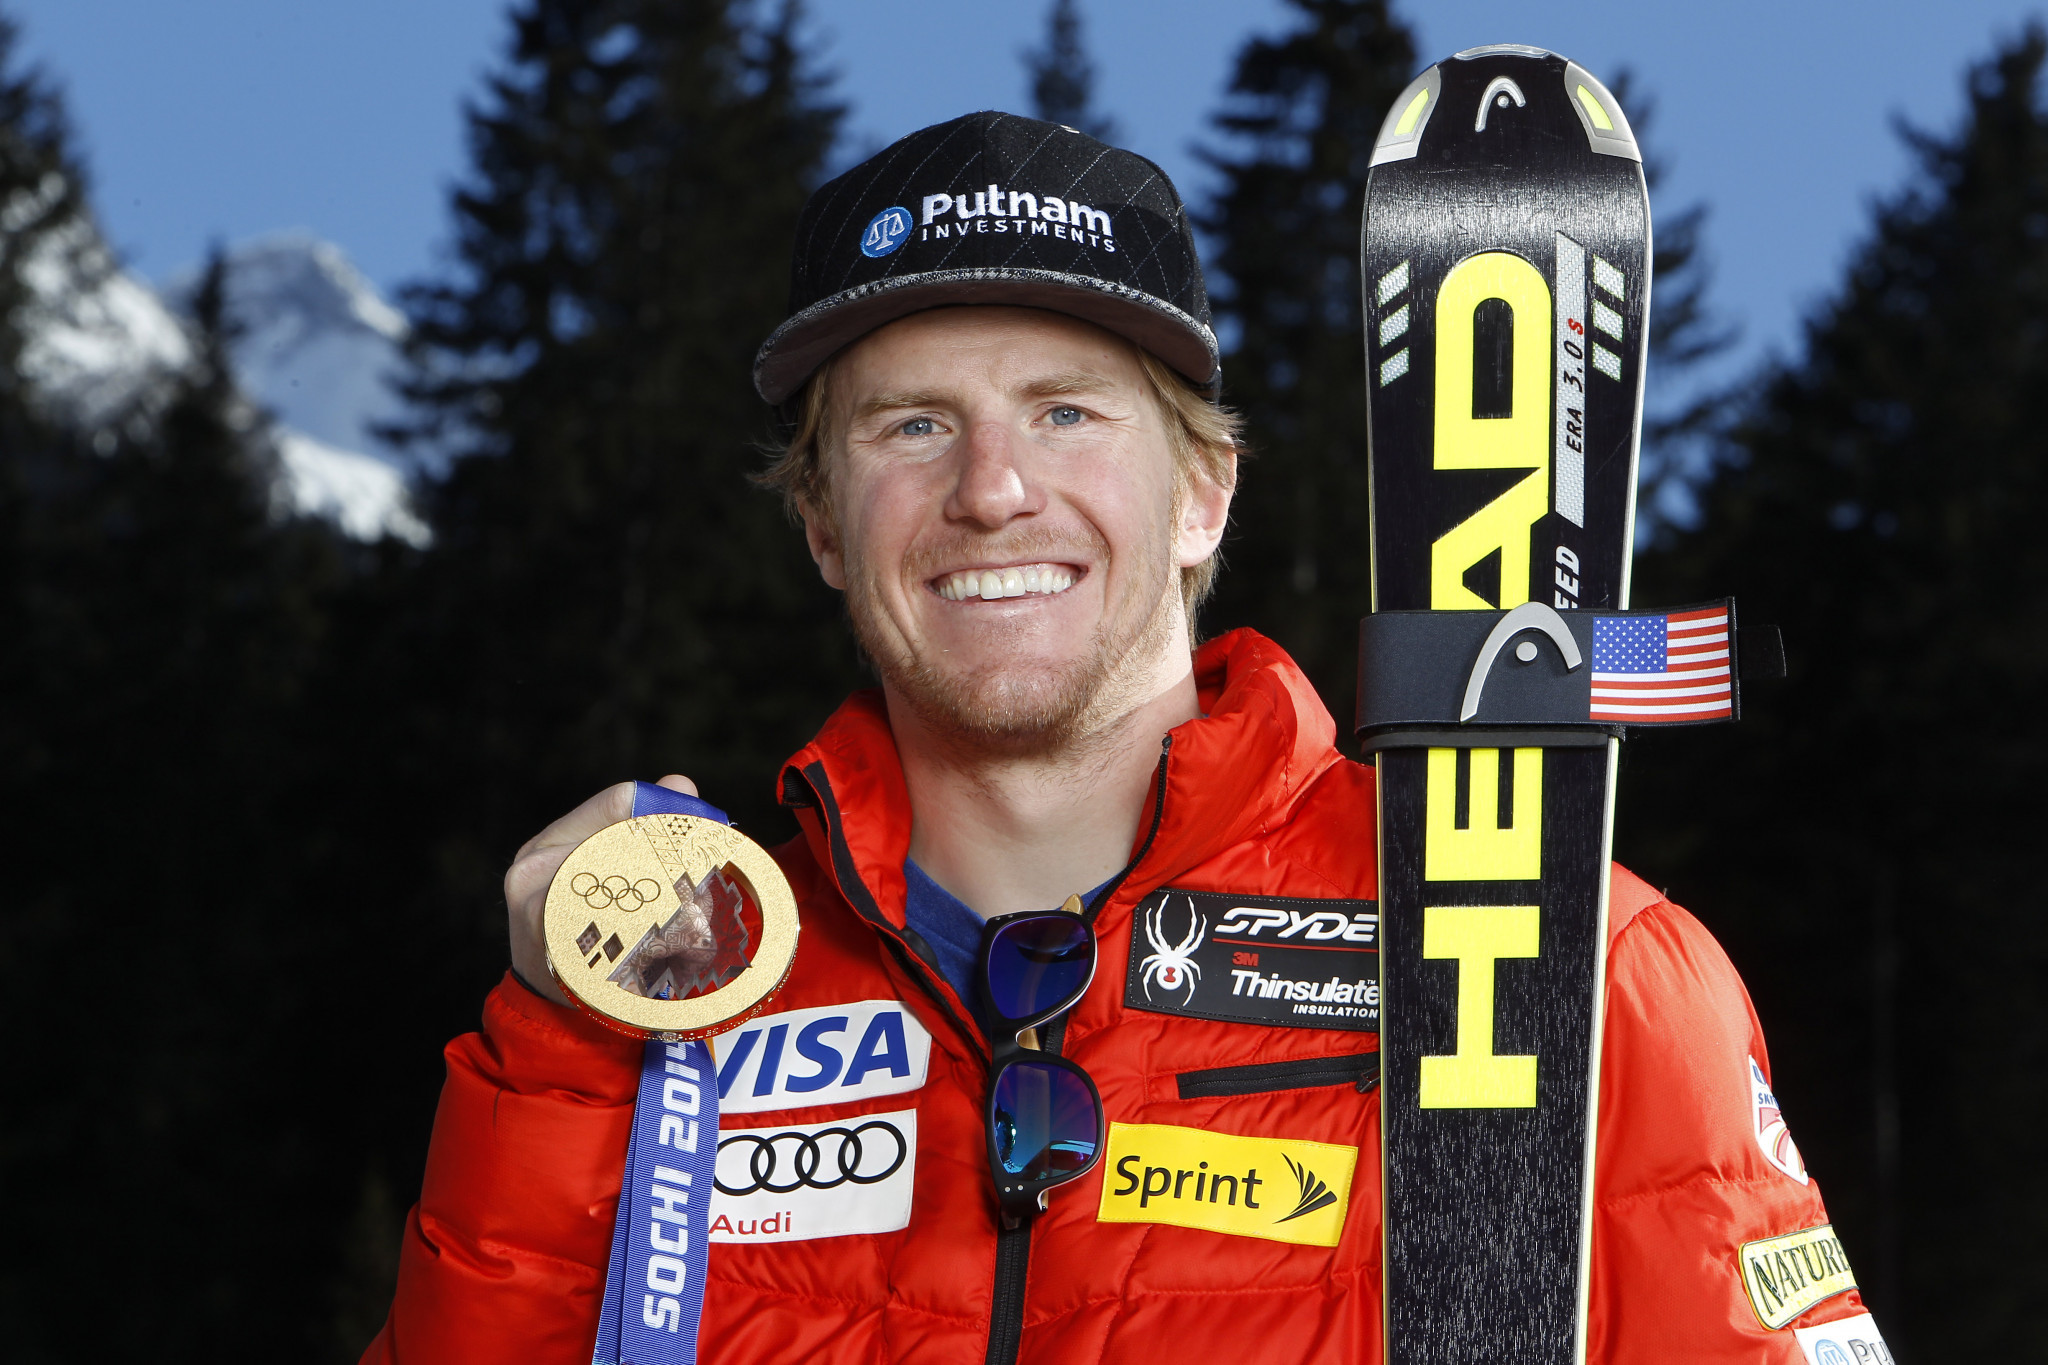 Ted Ligety earned his second Olympic gold medal at Sochi 2014 ©Getty Images